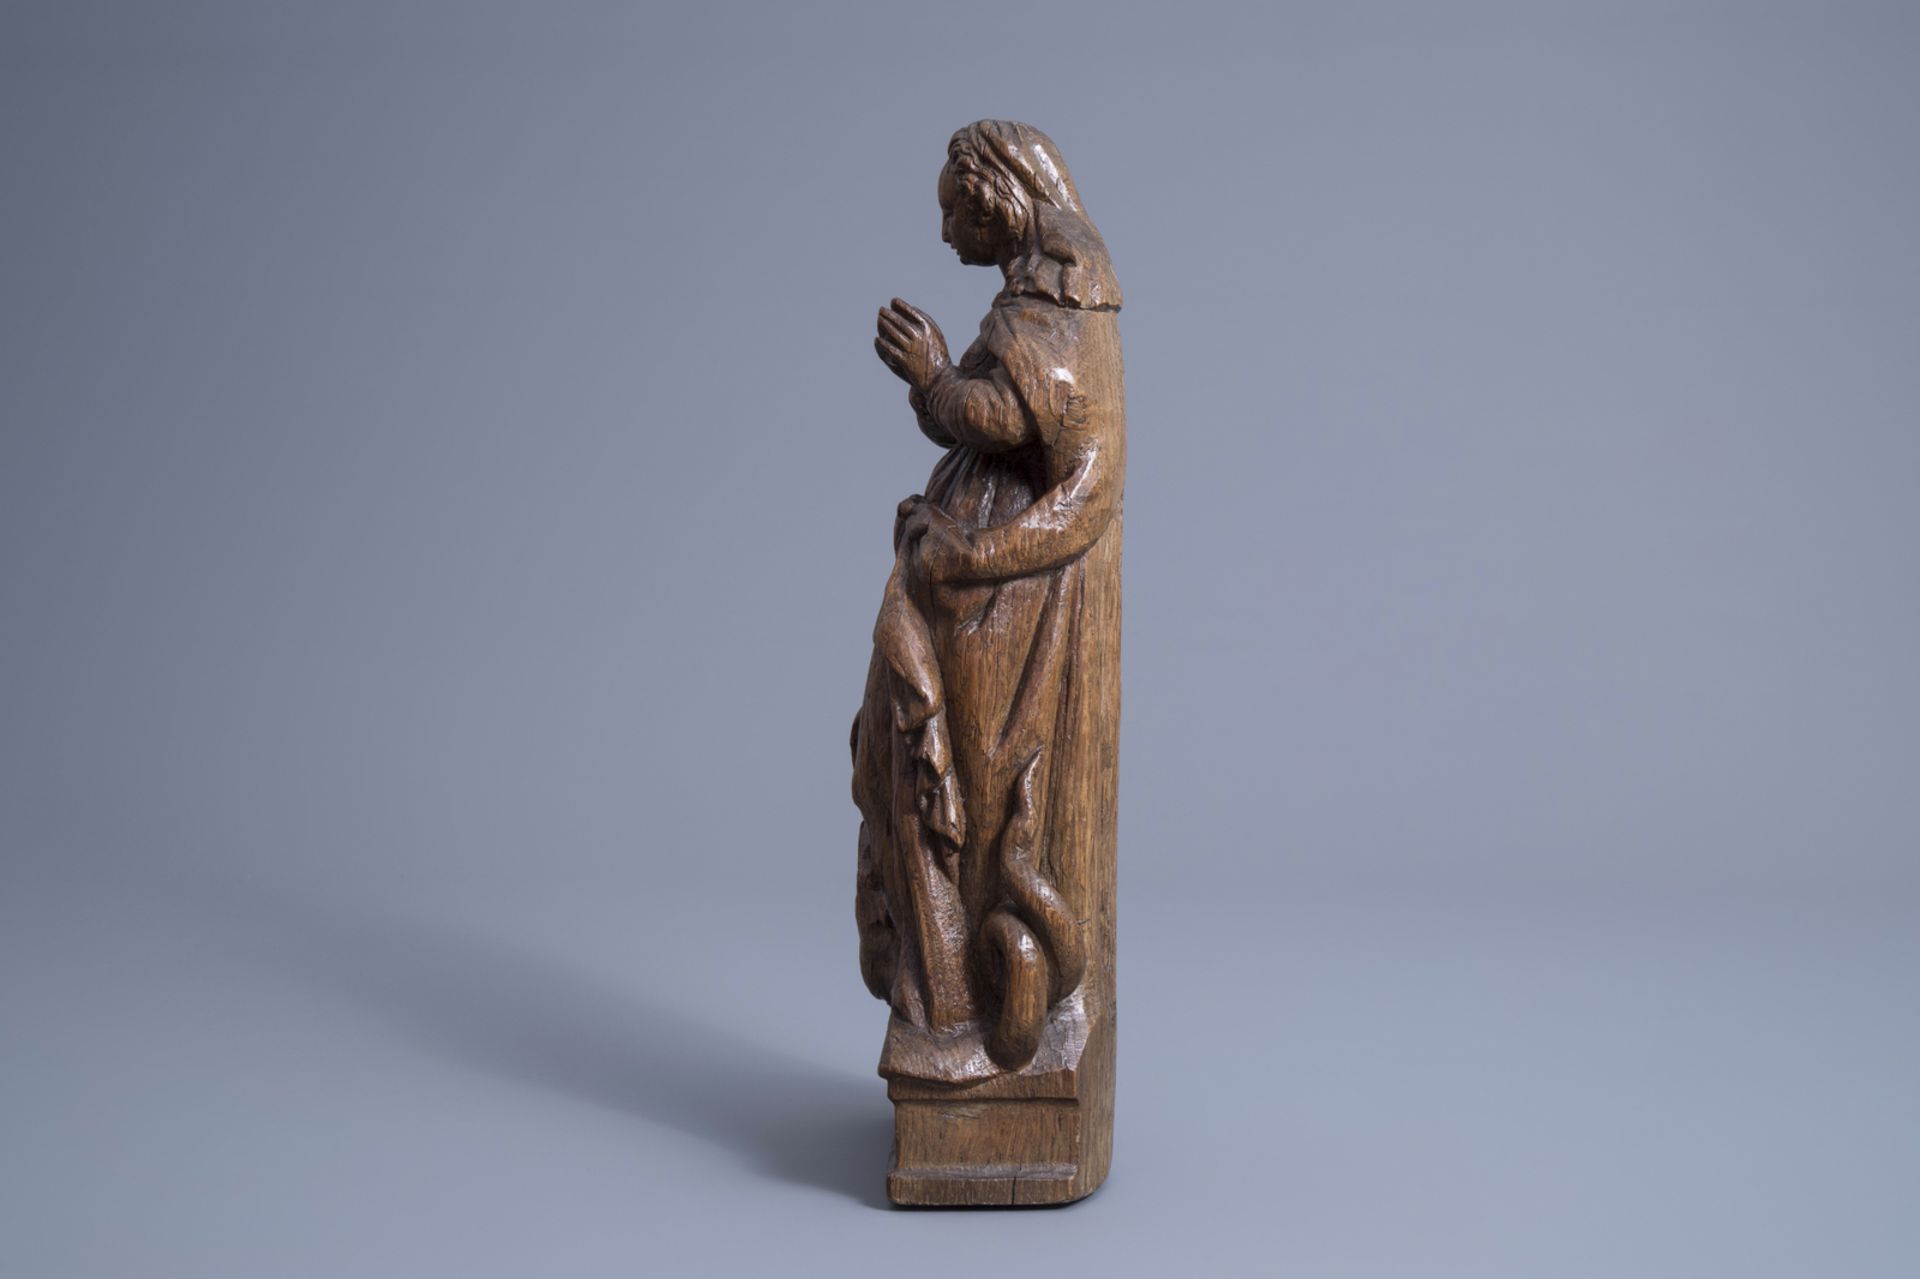 A carved oak wooden figure of Saint Marina the Great Martyr, Southern Netherlands, Flanders, 16th C. - Image 5 of 7